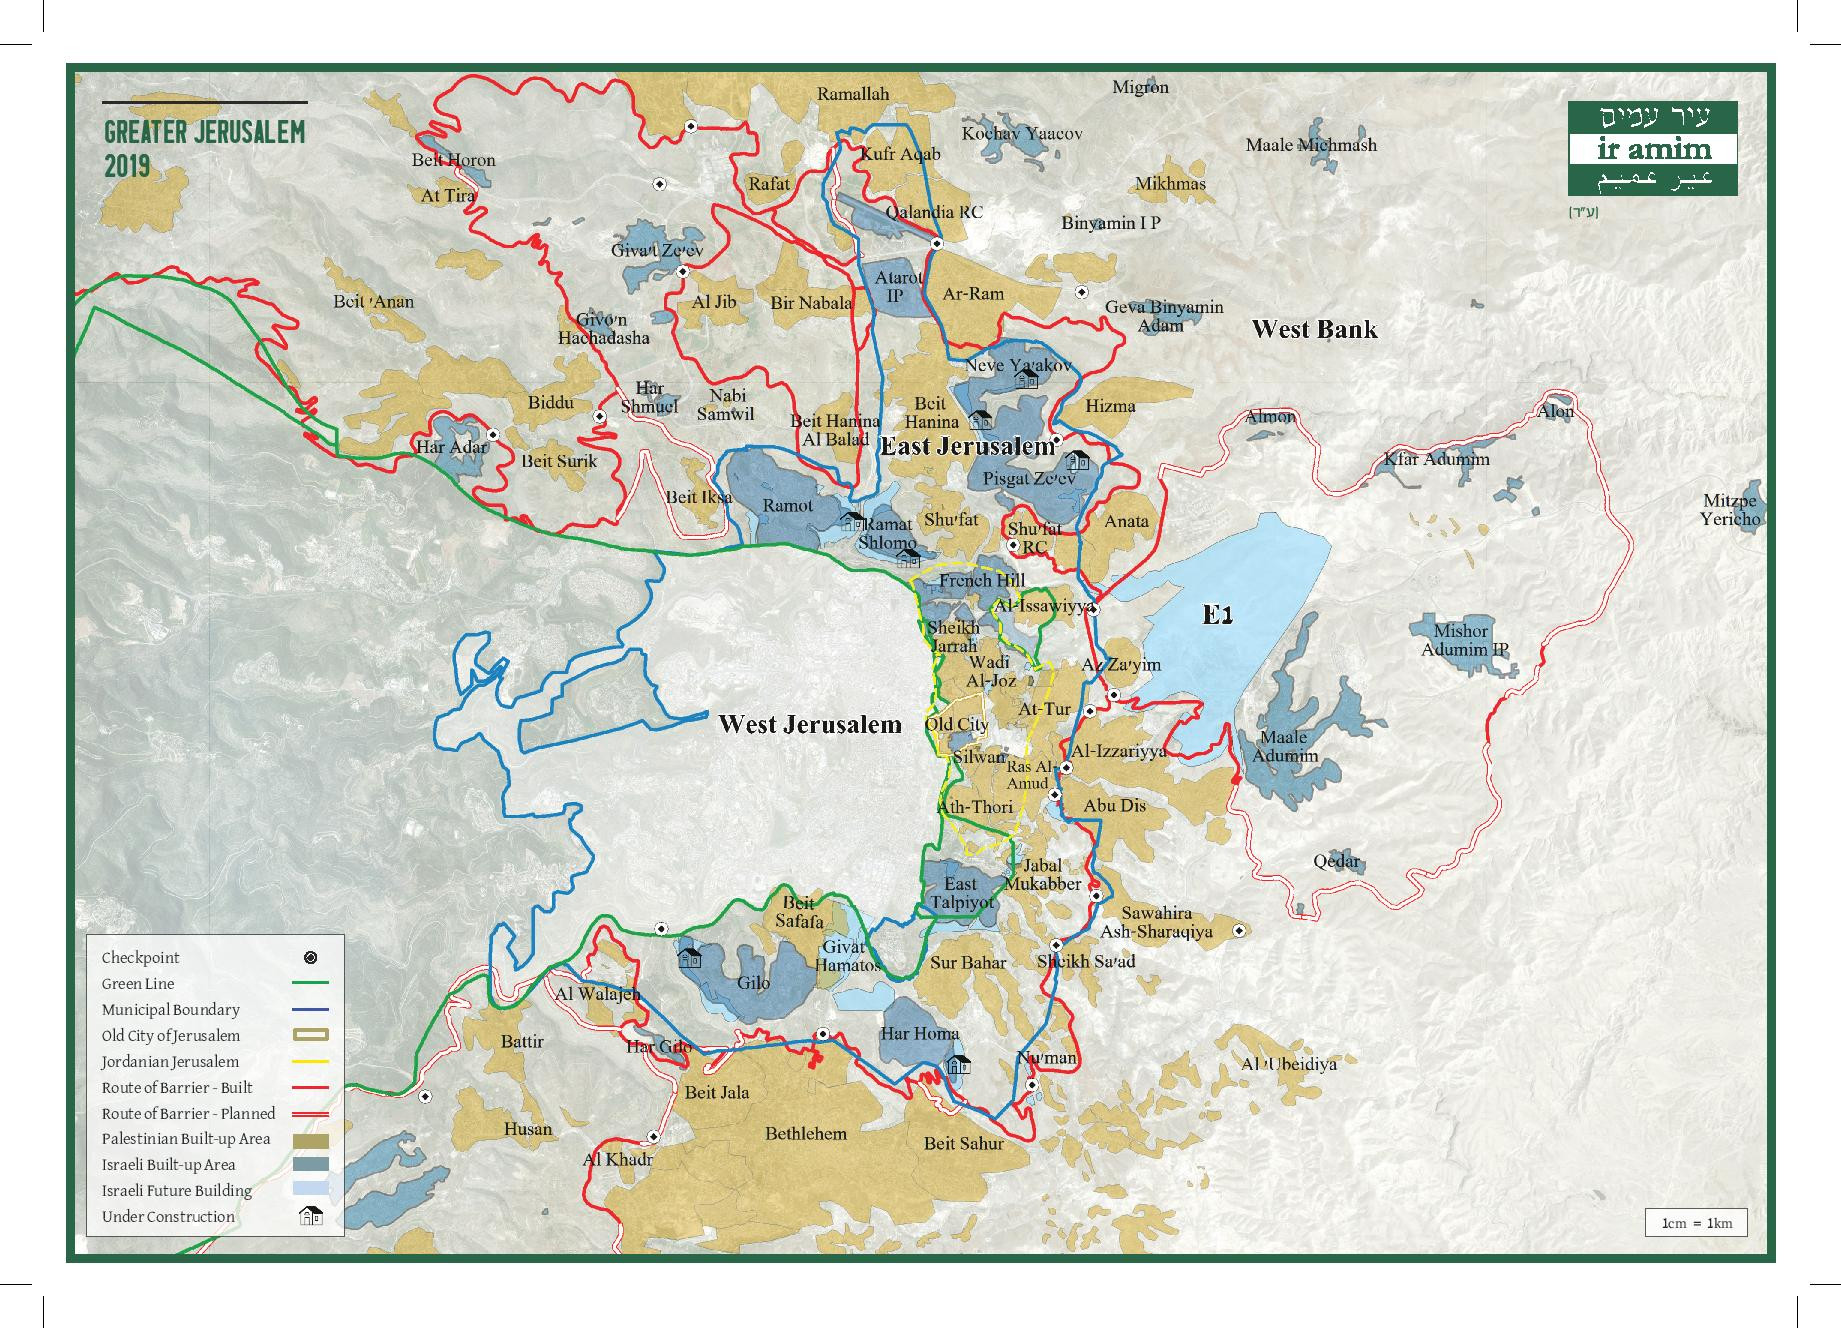 Image shows a map of Jerusalem with the Green Line, municipal boundaries, Israeli and Palestinian neighborhoods, and the Separation Barrier delineated.